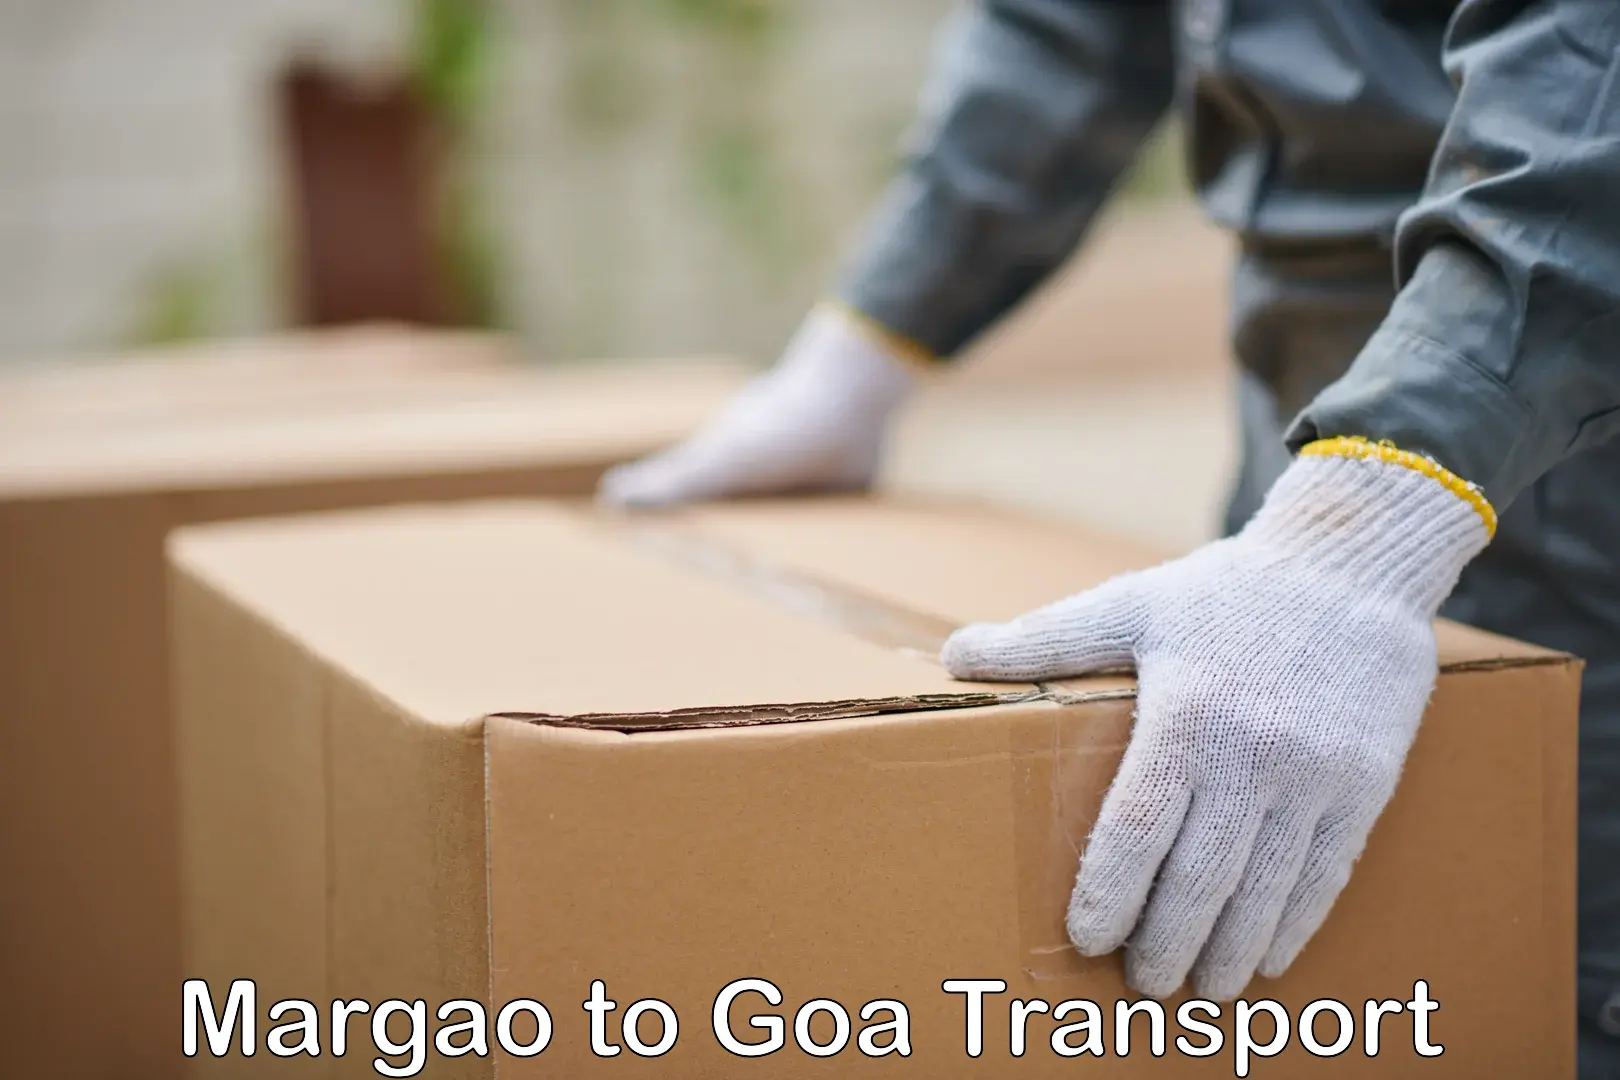 Transport in sharing Margao to Goa